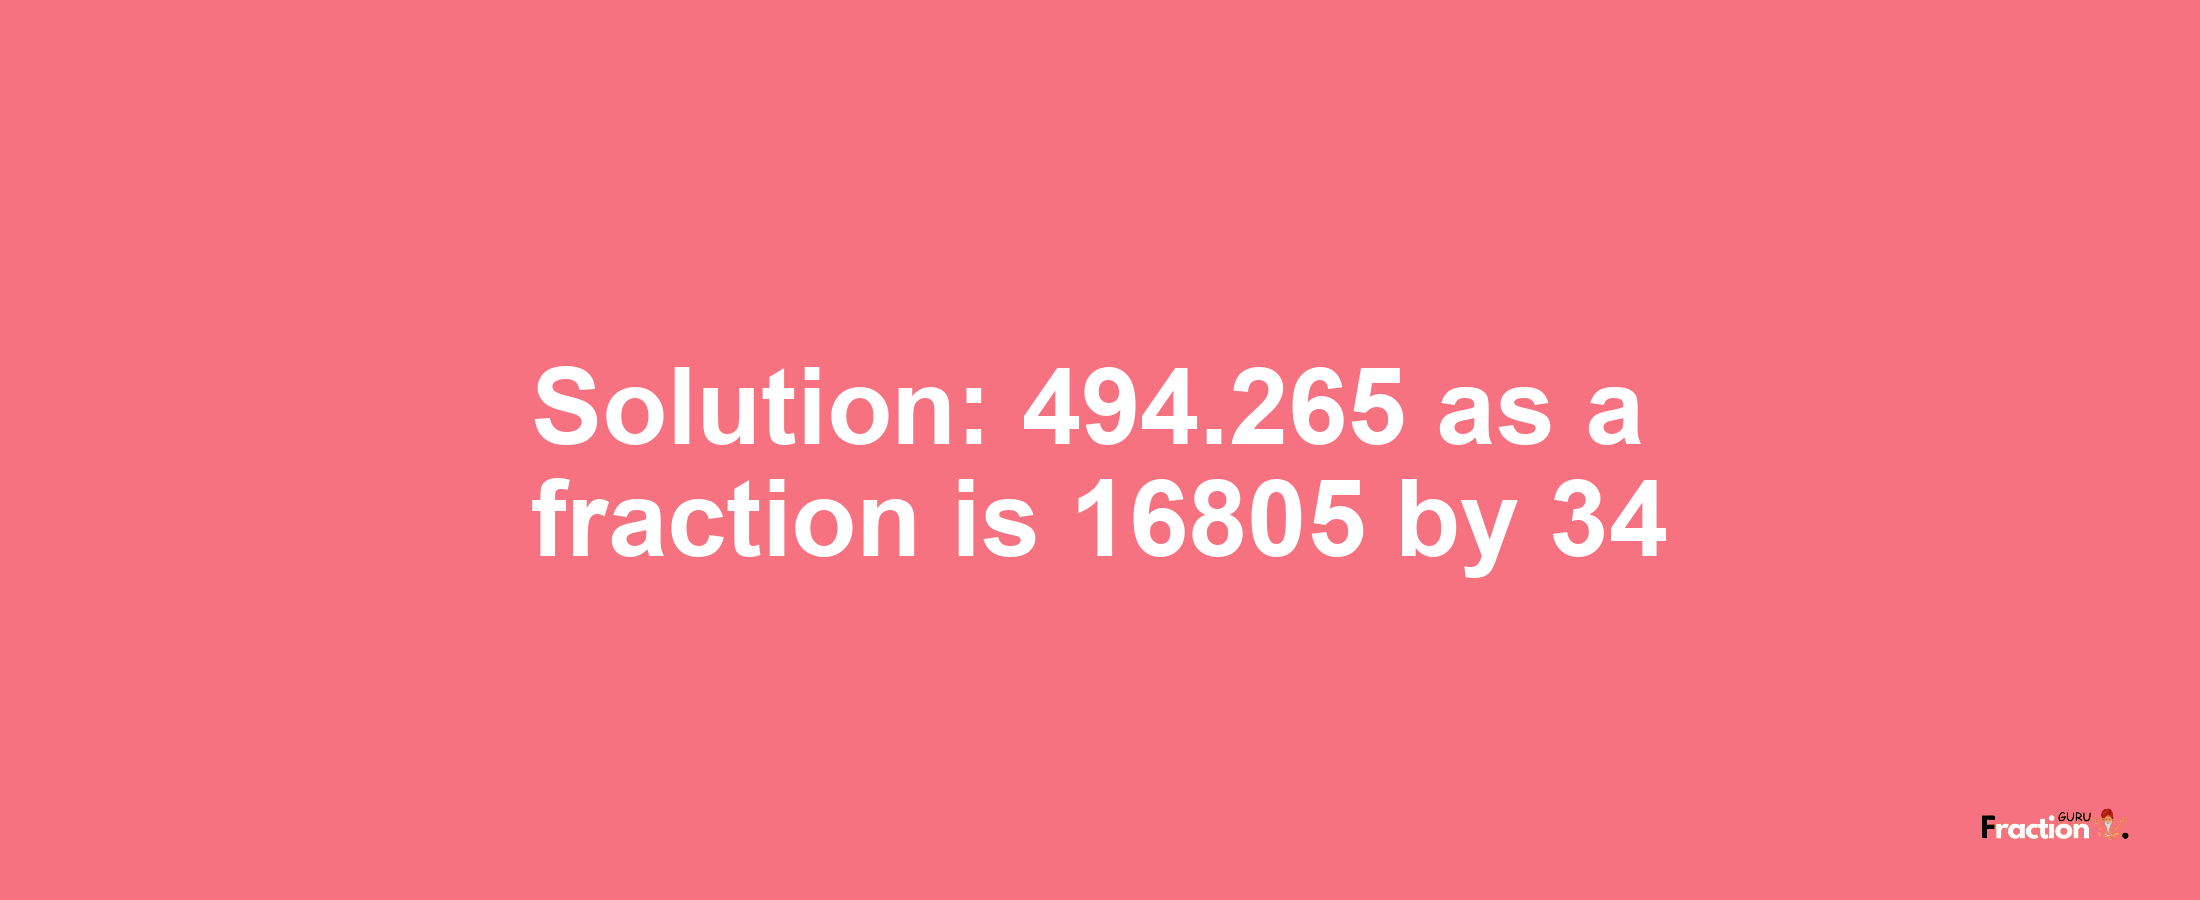 Solution:494.265 as a fraction is 16805/34